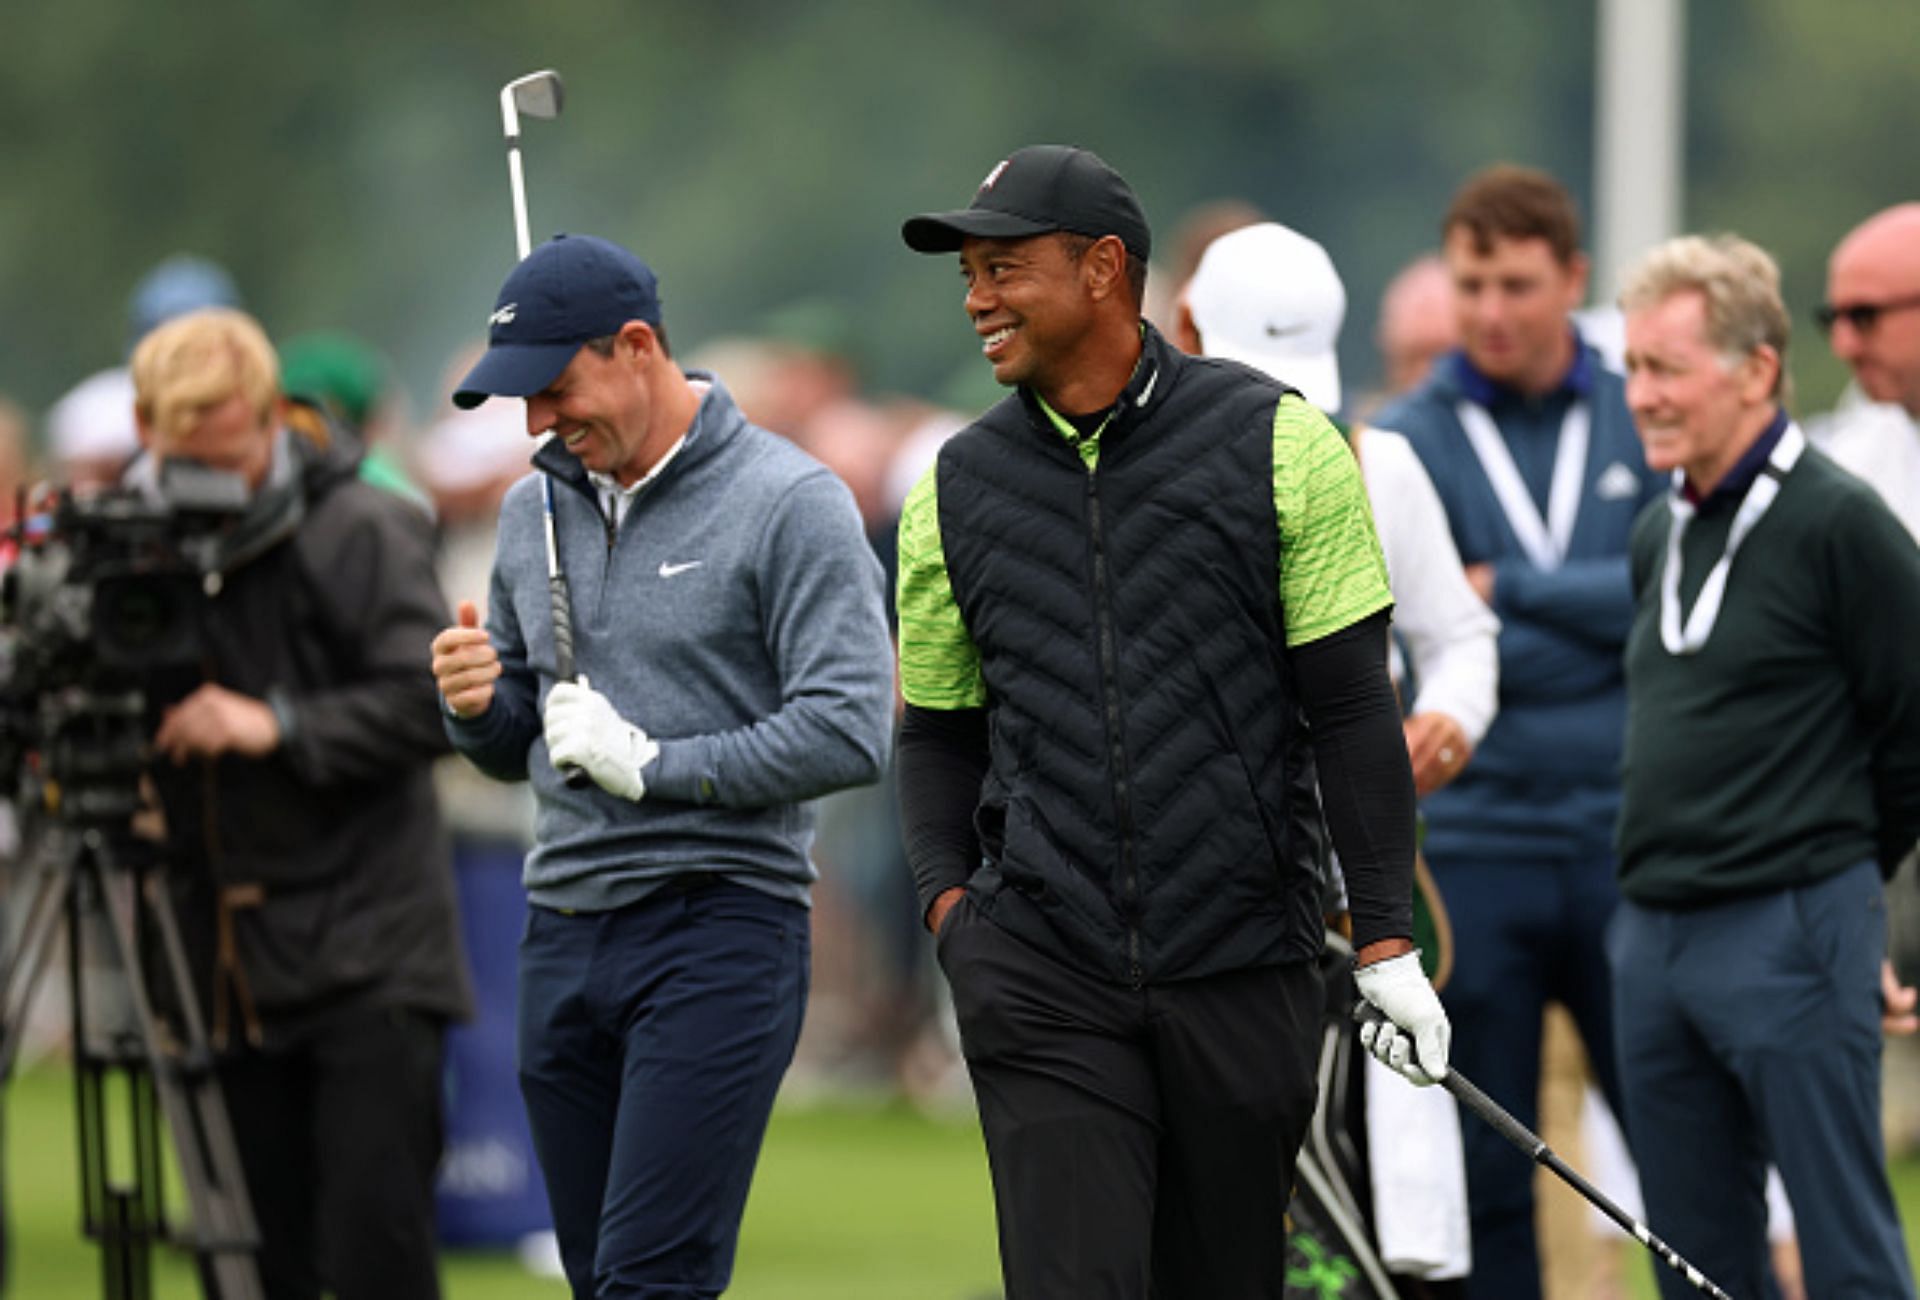 Tiger Woods and Rory McIlroy (Image via Getty).